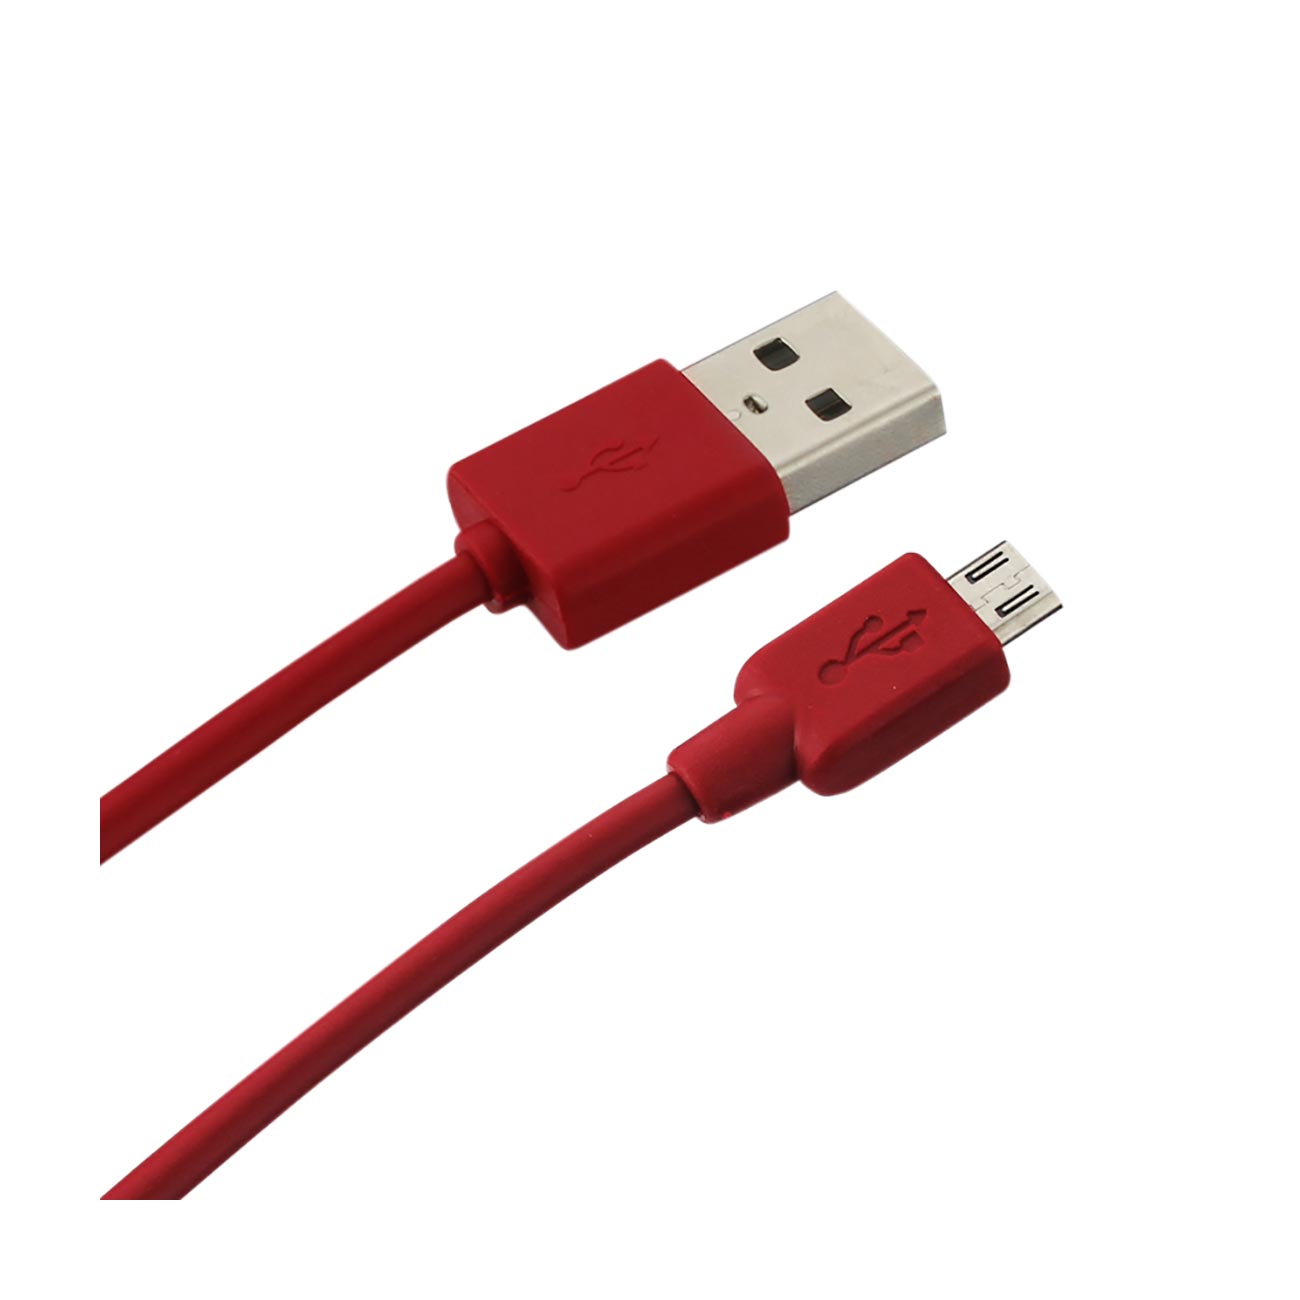 Car Charger Wall Adapter Micro With Cable USB 1A 3-In-1 Red Color